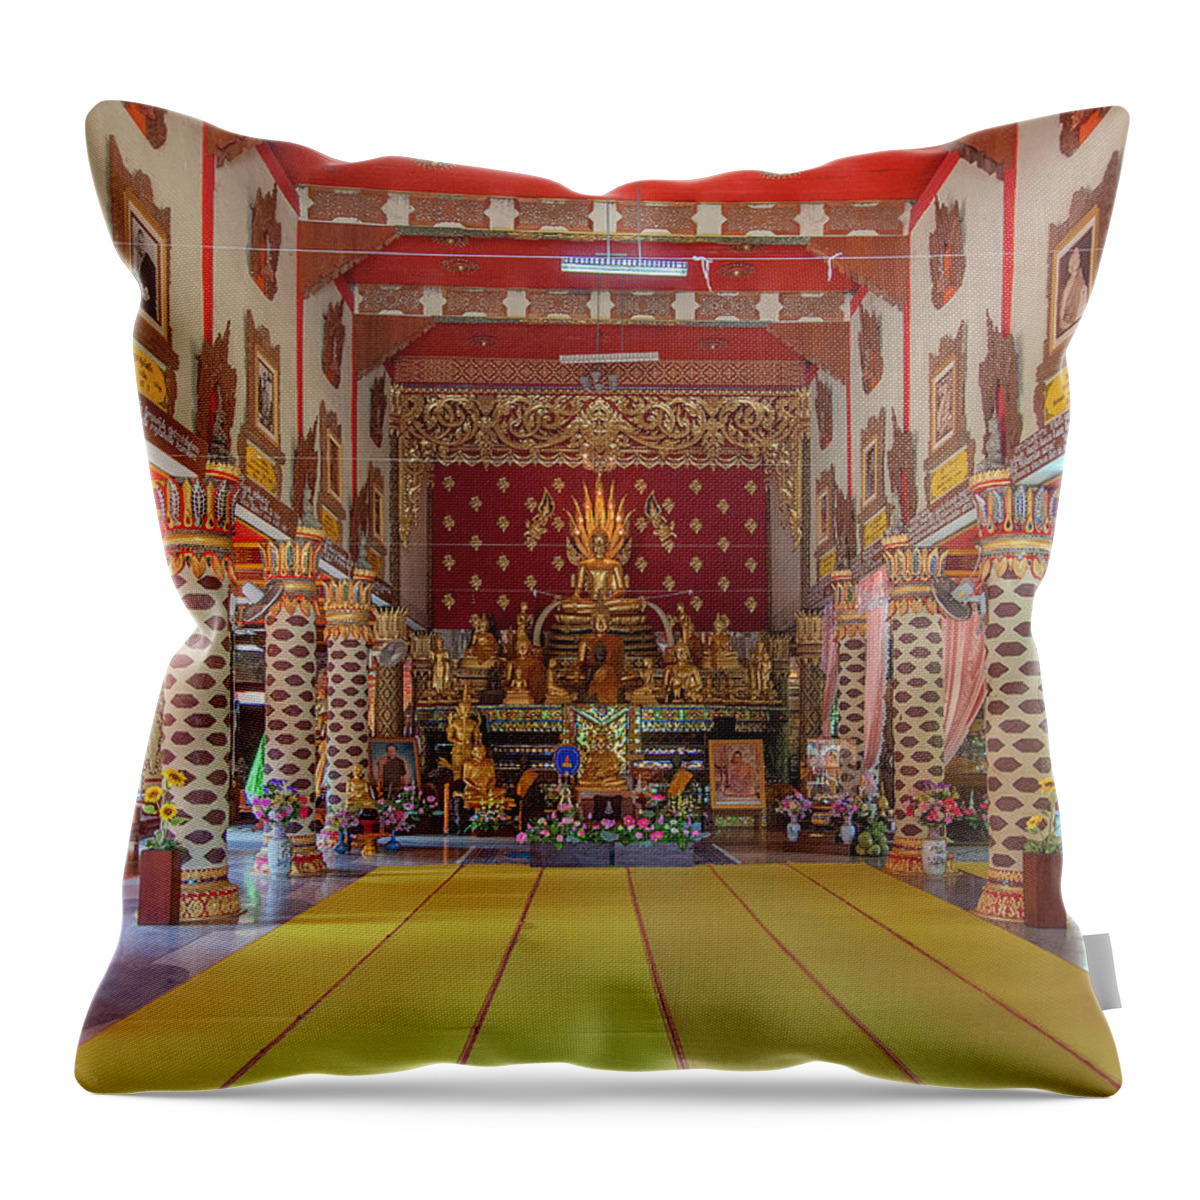 Scenic Throw Pillow featuring the photograph Wat Thung Luang Phra Wihan Interior DTHCM2104 by Gerry Gantt